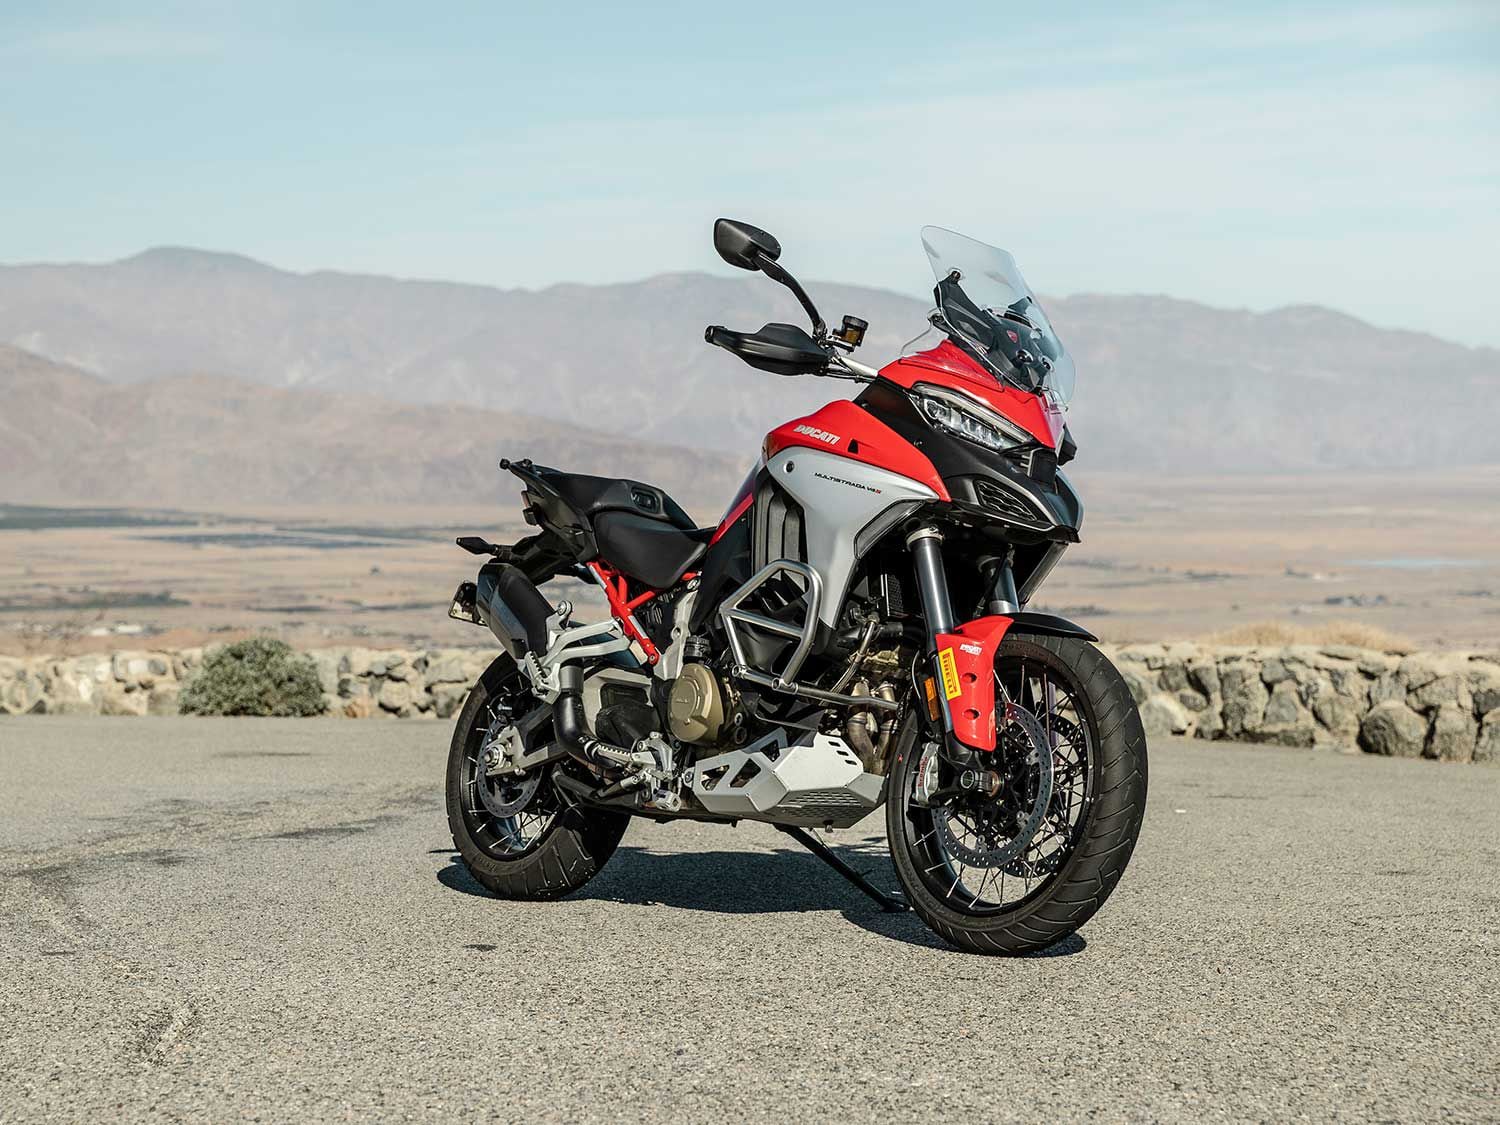 Ducati continues to evolve its Multistrada platform. For 2021 it has been hot-rodded and is more sporty. Yet it also plays nice off-road and is more comfortable, too.